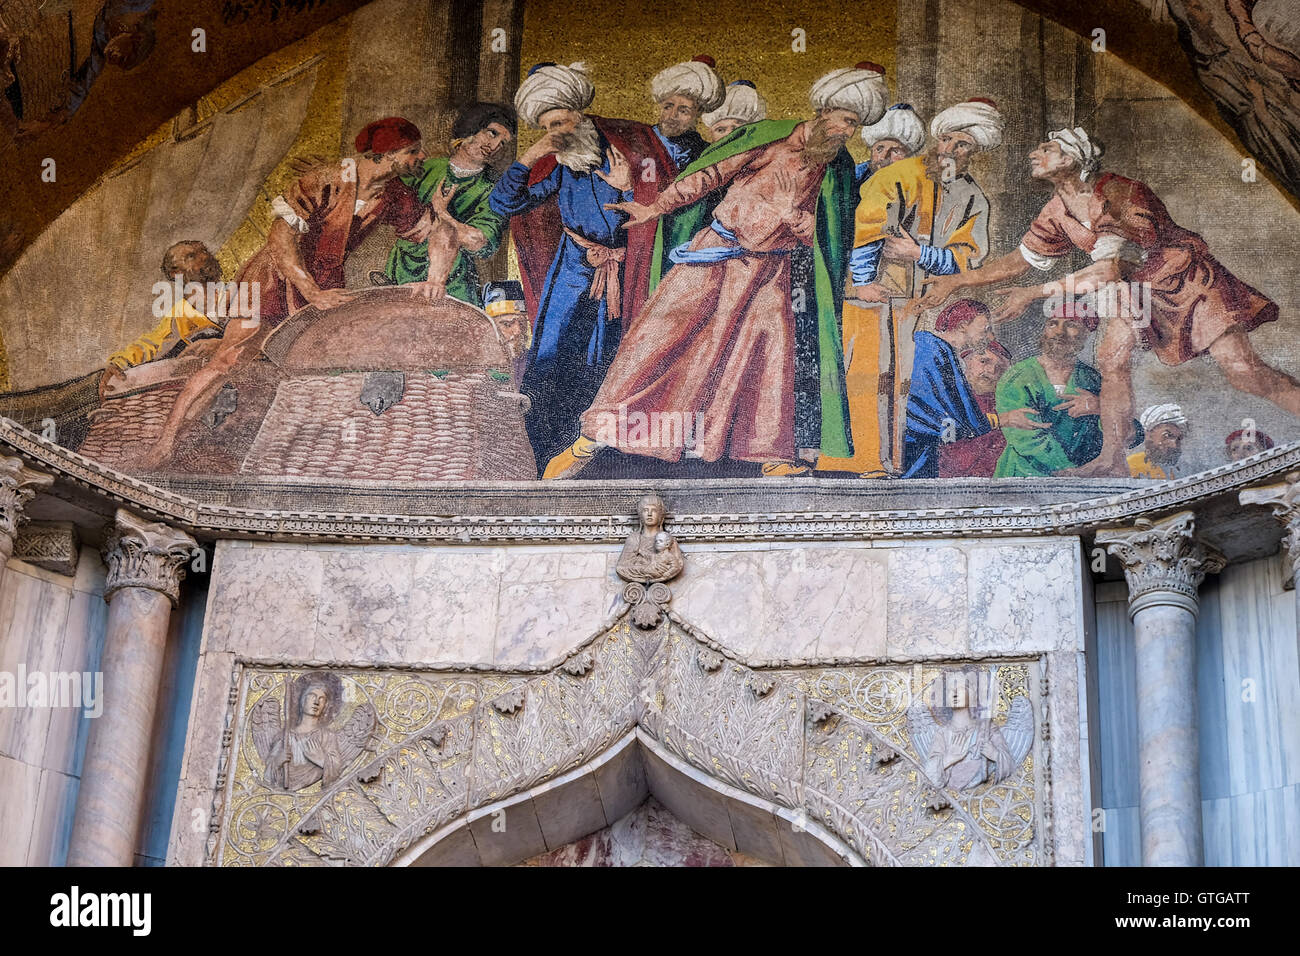 Mosaic on the facade of st Marks basilica with scenes showing the history of the relics of Saint Mark, Venice Italy Stock Photo